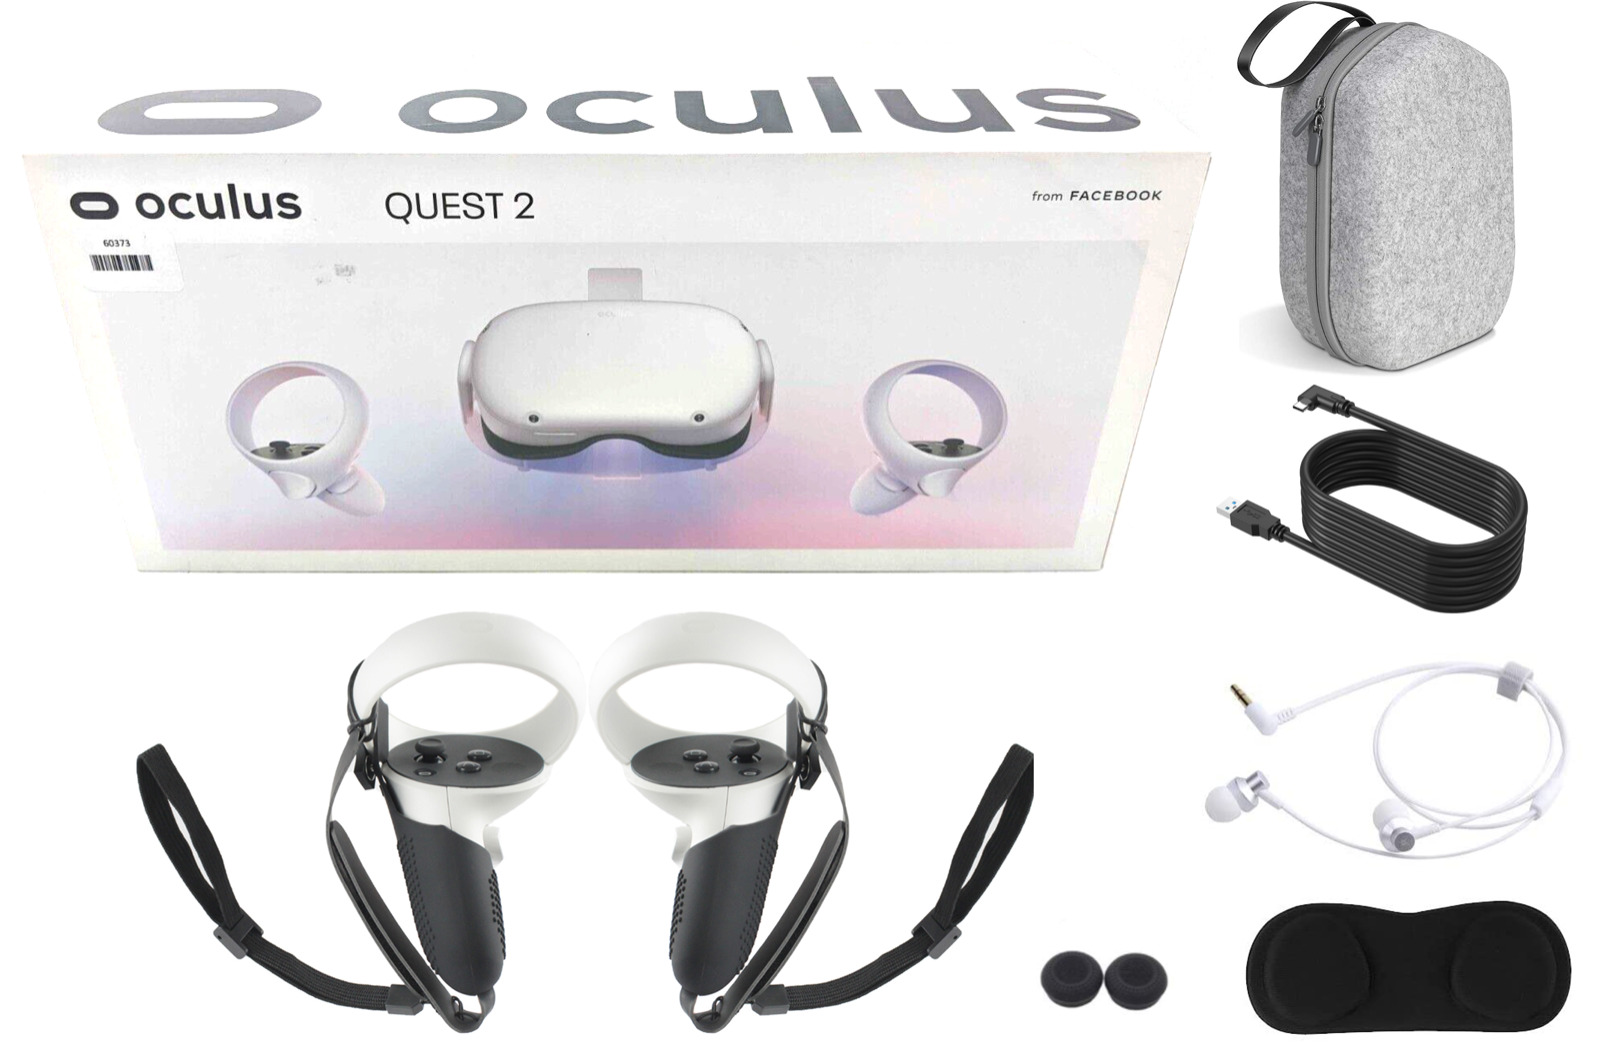 Oculus - Quest 2 Advanced All-In-One Virtual Reality Headset - 128GB ON SALE AT BEST BUY!